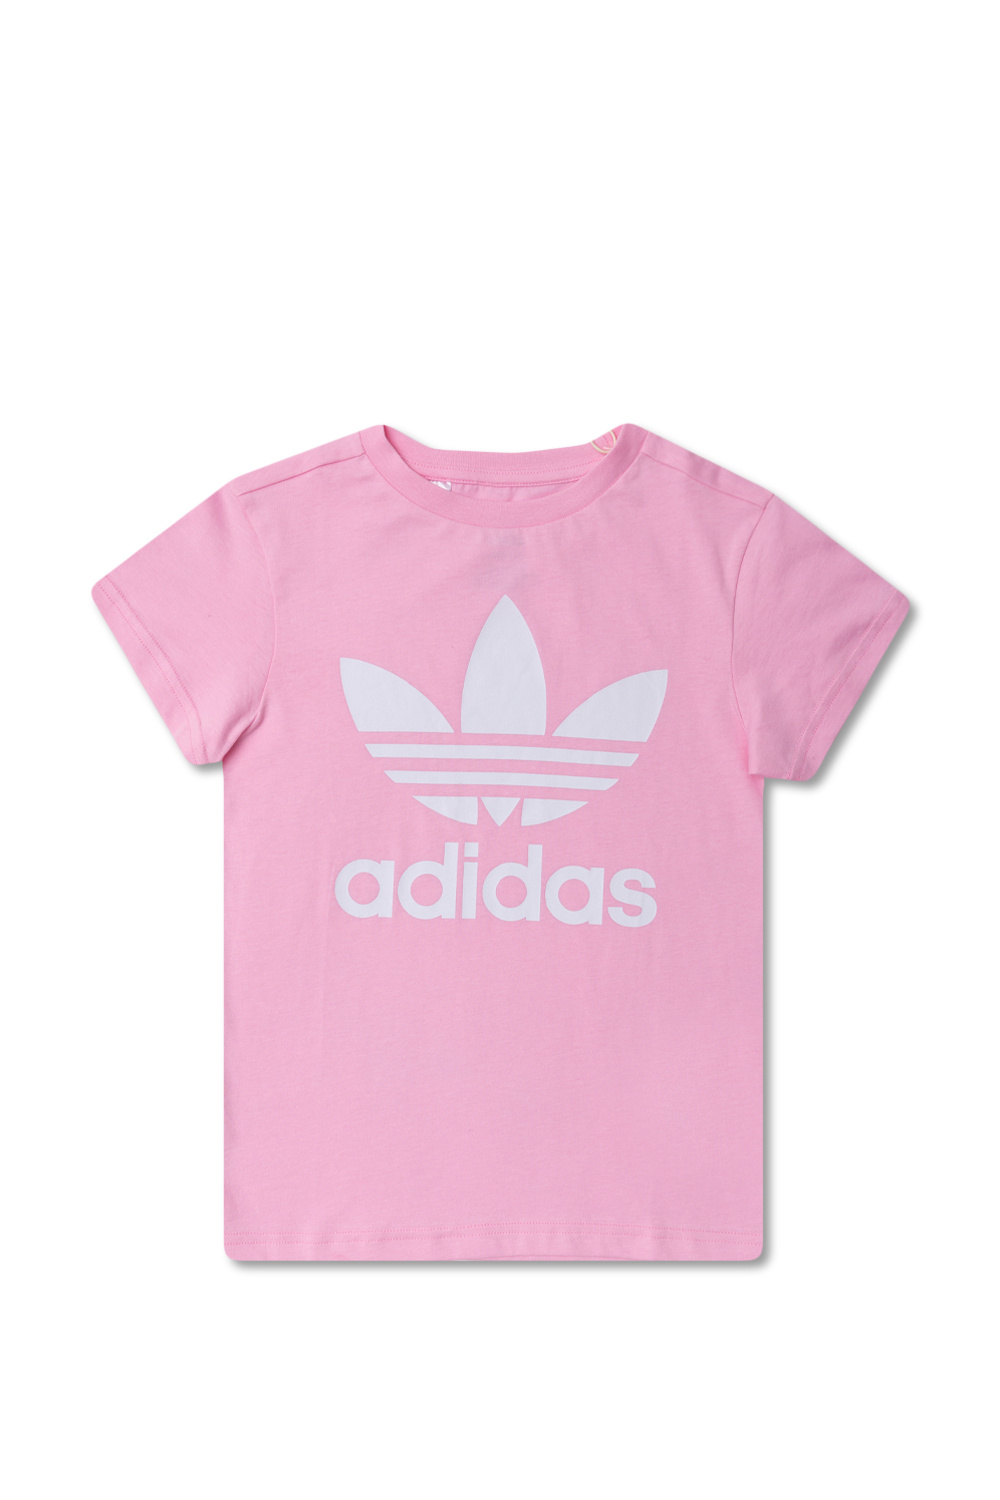 adidas order in logo - Pink cheap Kids Canada status list location cheap shirt - ADIDAS with server today - IetpShops T